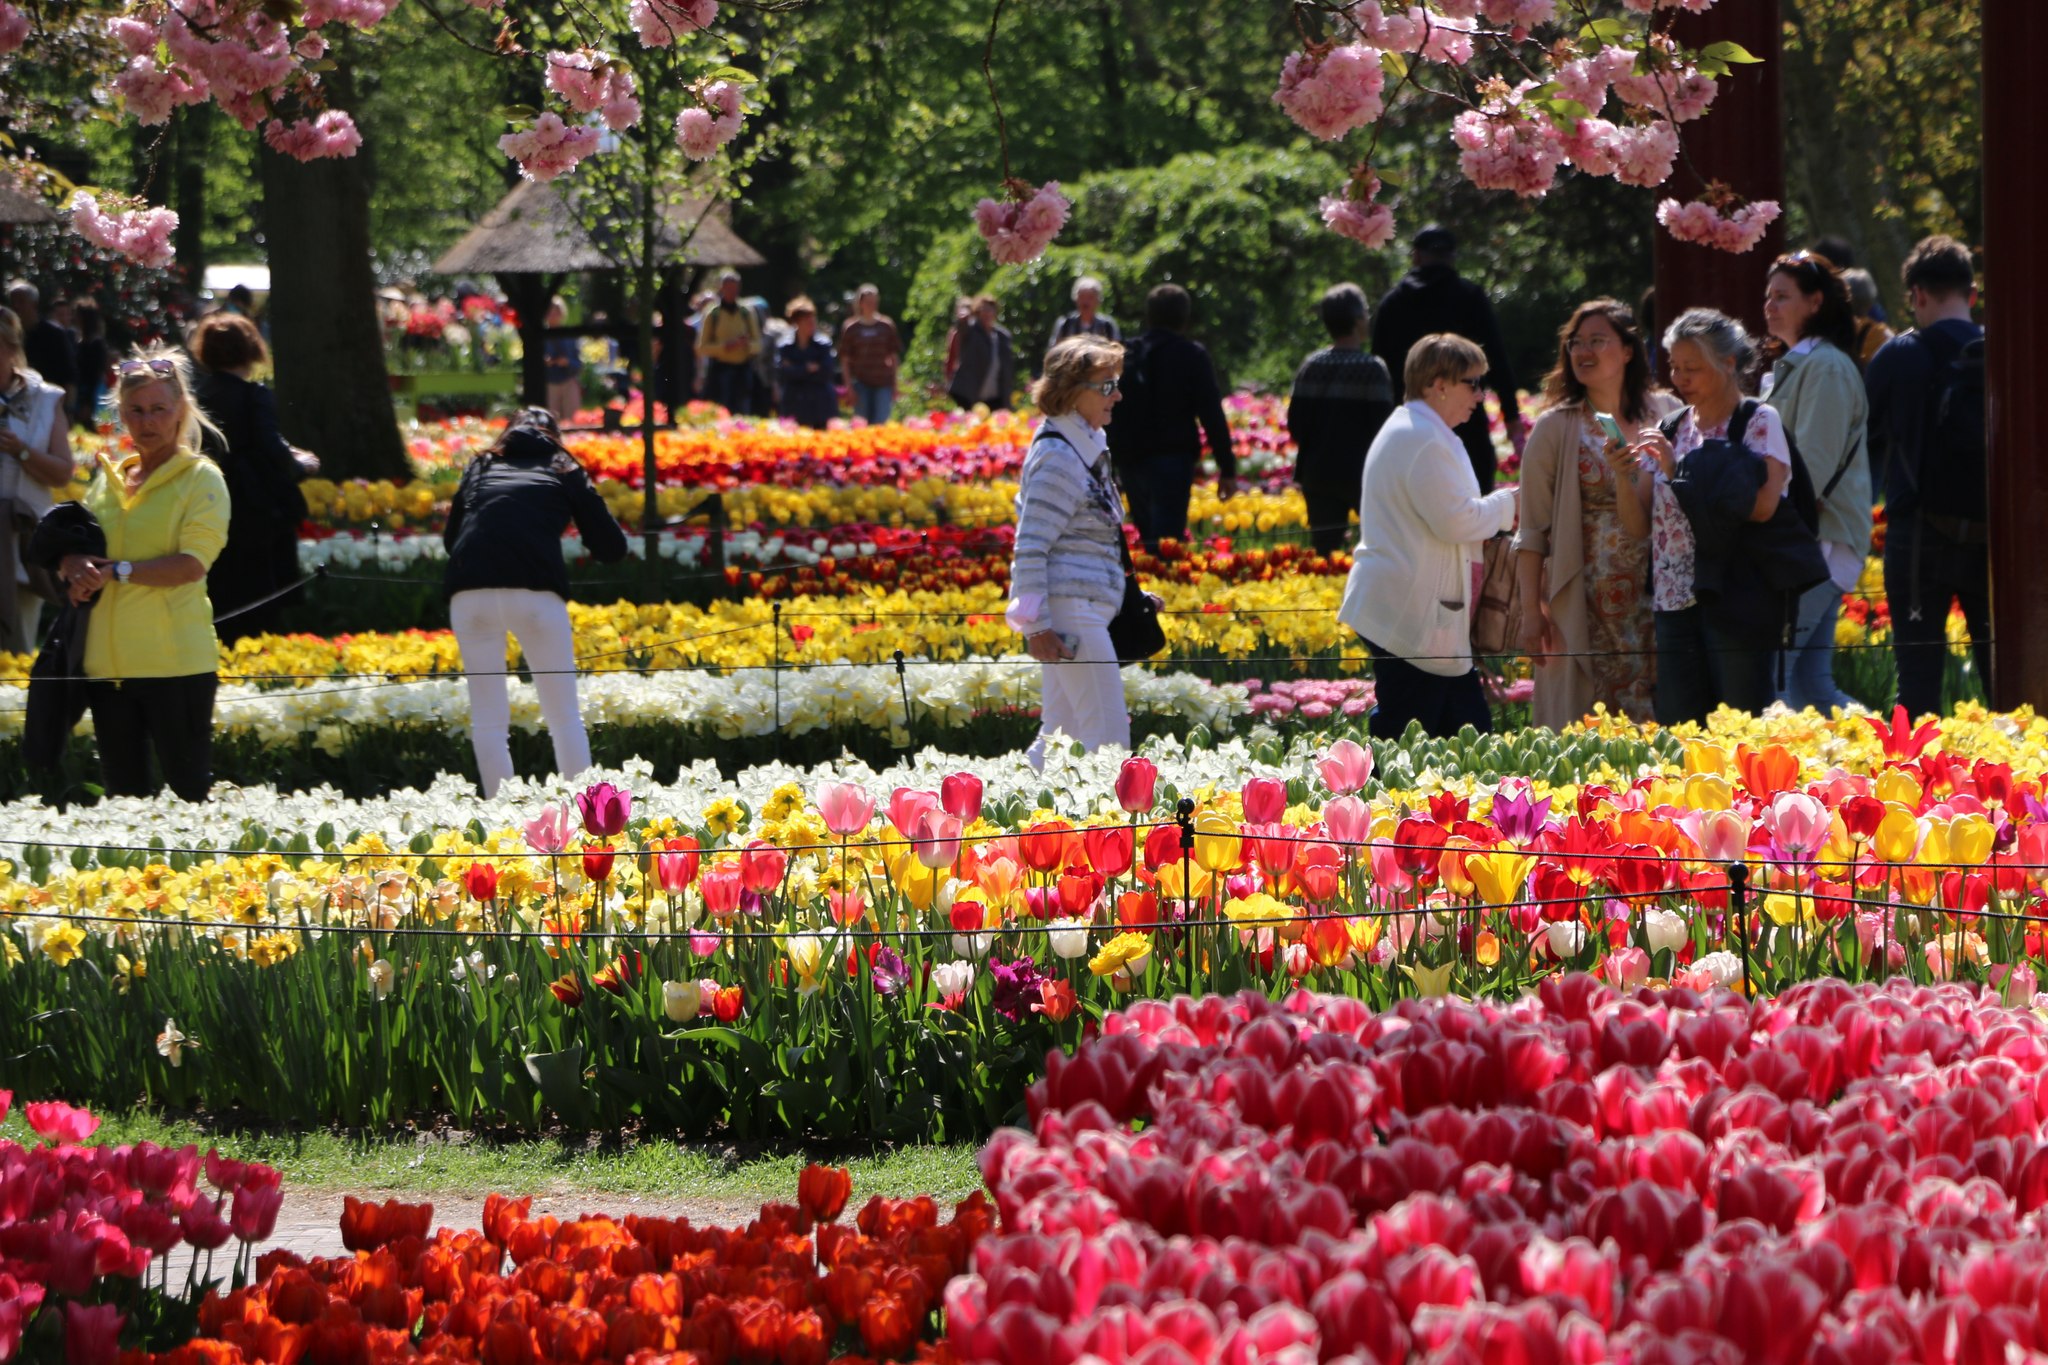 This applies to both the tulips in the bulb fields and to Keukenhof Gardens. Come and enjoy the tulips until 15 May. Visit the #tulips in #amsterdam from 24 March to 15 May 2022. www.tulipfestivalamsterdam.com